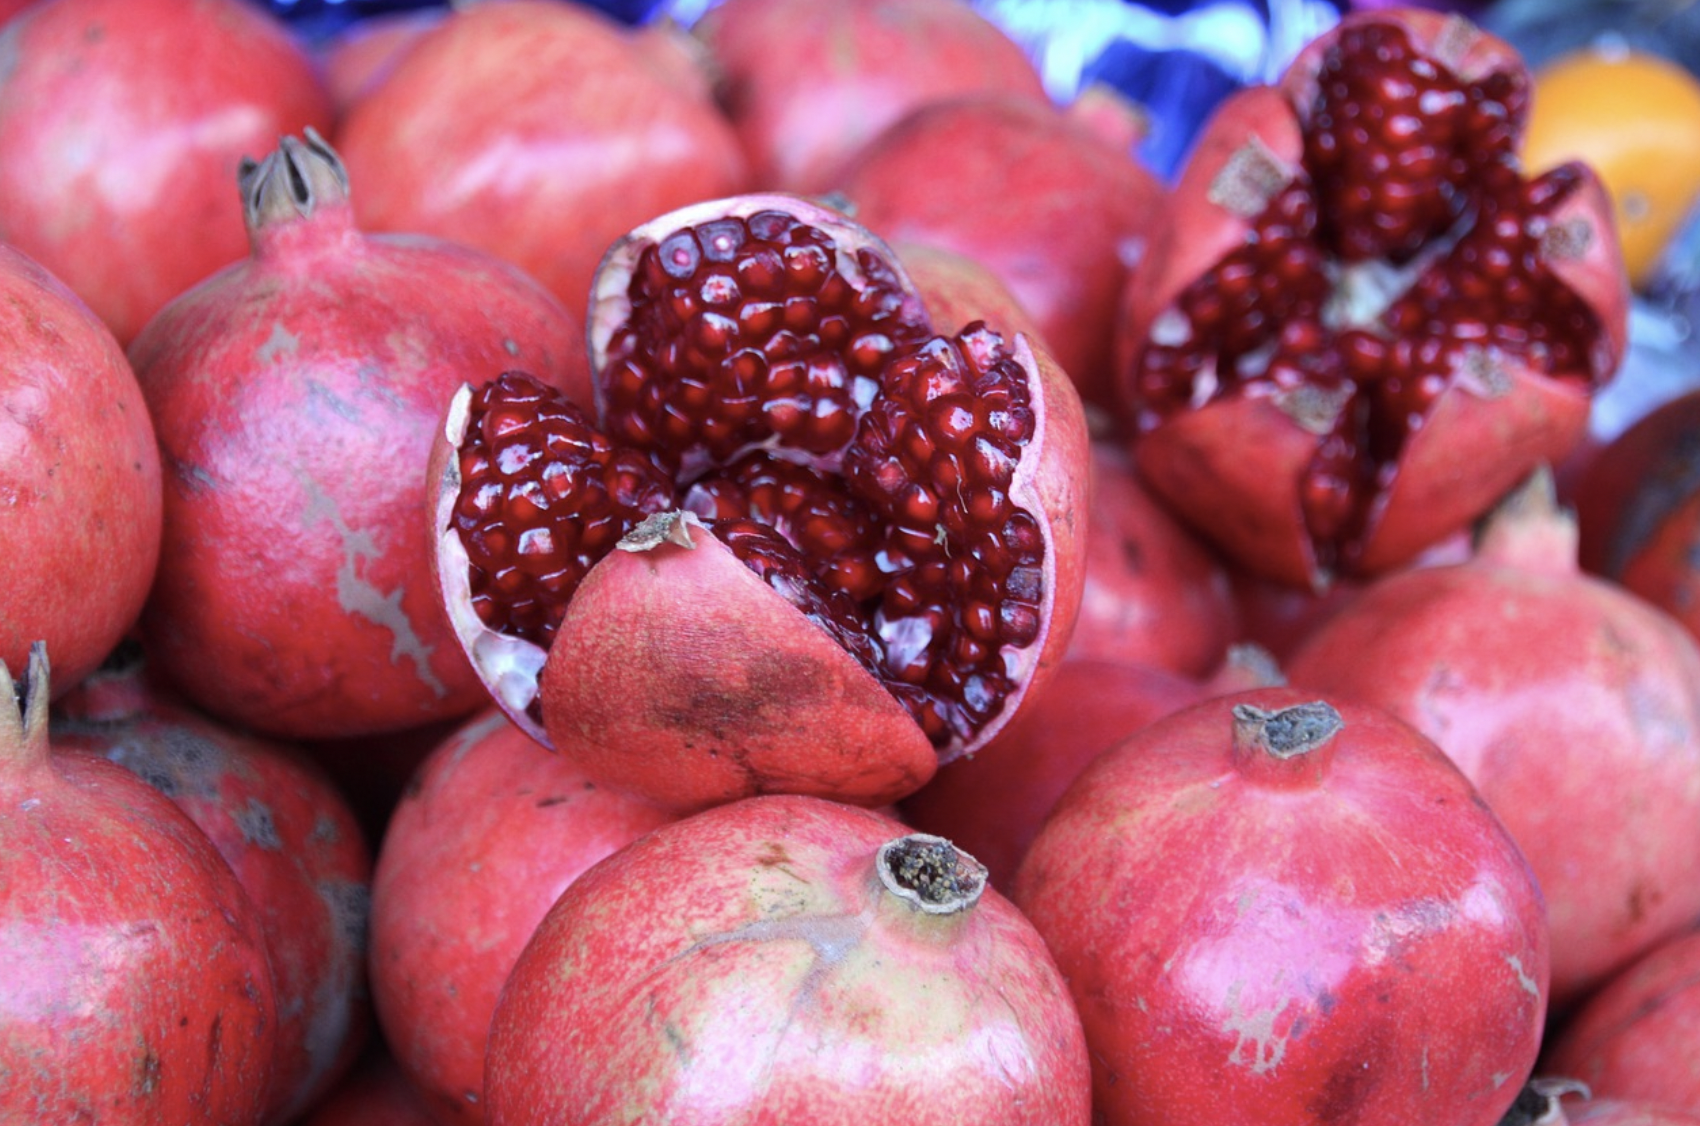 Ripe pomegranate seeds aren't always red, Home and Garden